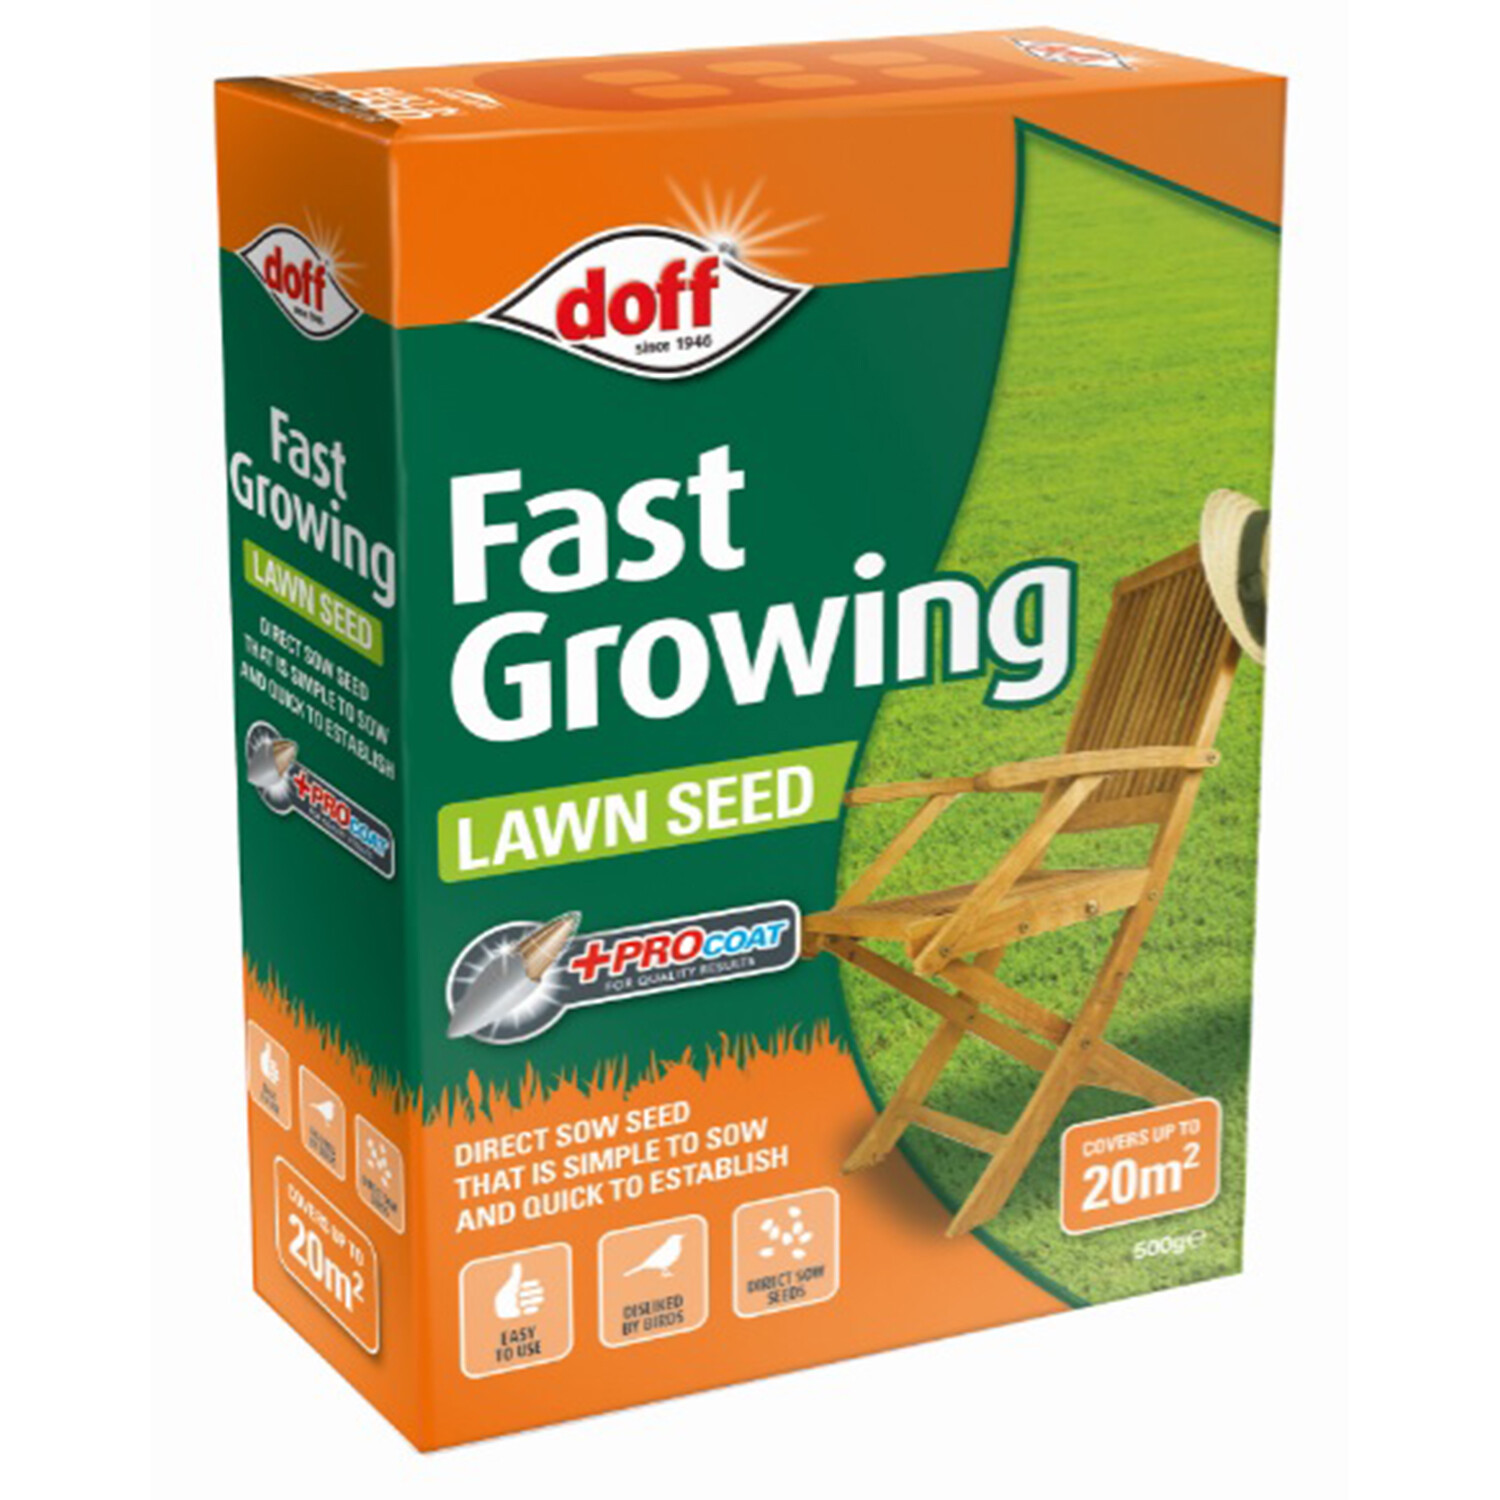 Doff Fast Growing Lawn Seed 500g Image